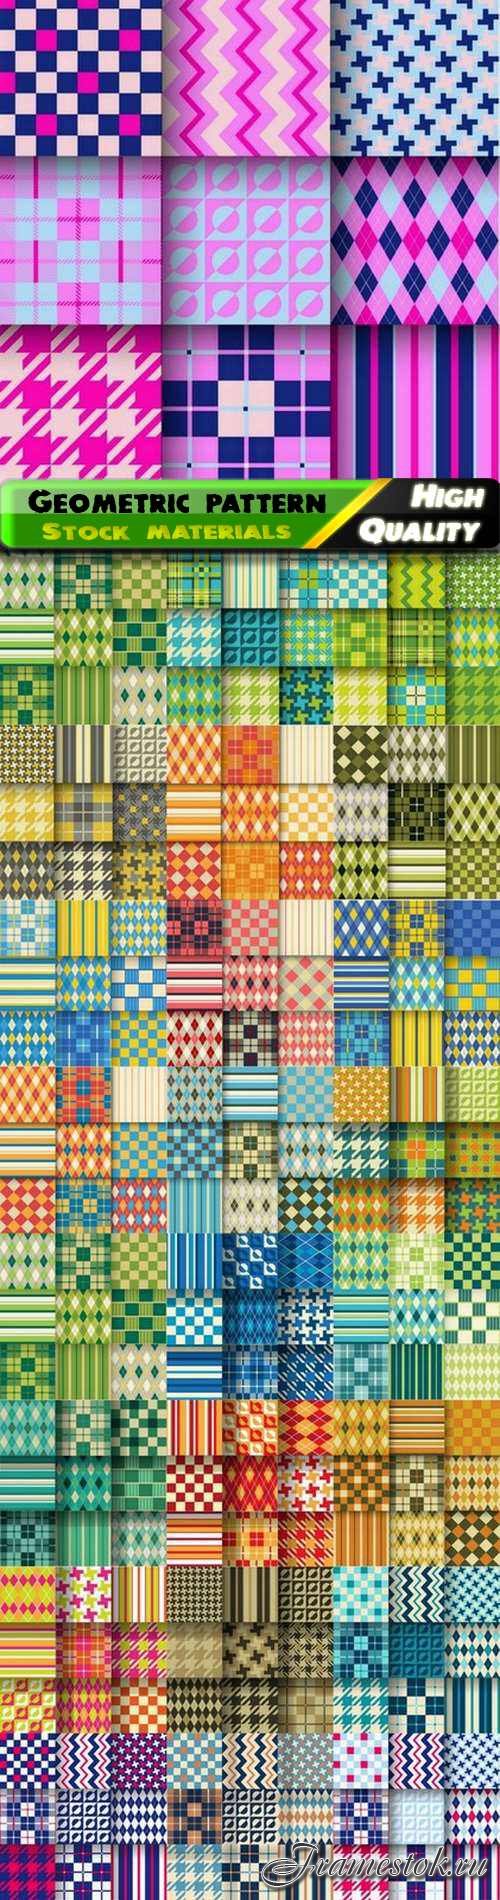 Geometric seamless pattern for wallpaper and textile or clothes design - 25 Eps